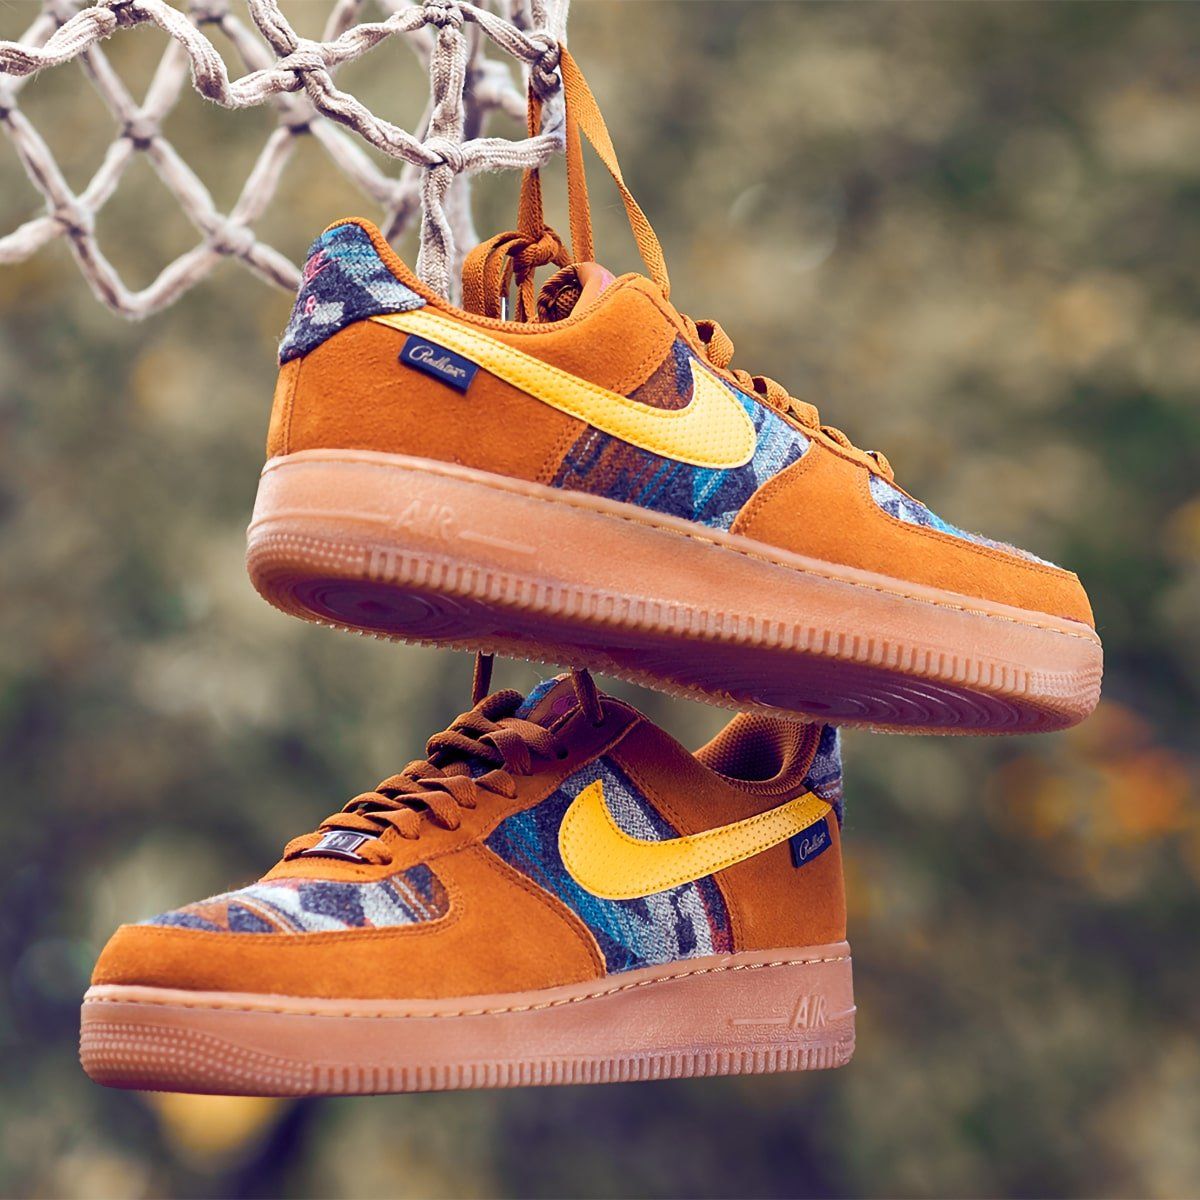 Nike Preview the Pendleton-Popped Air Force 1 Low N7 | HOUSE OF HEAT